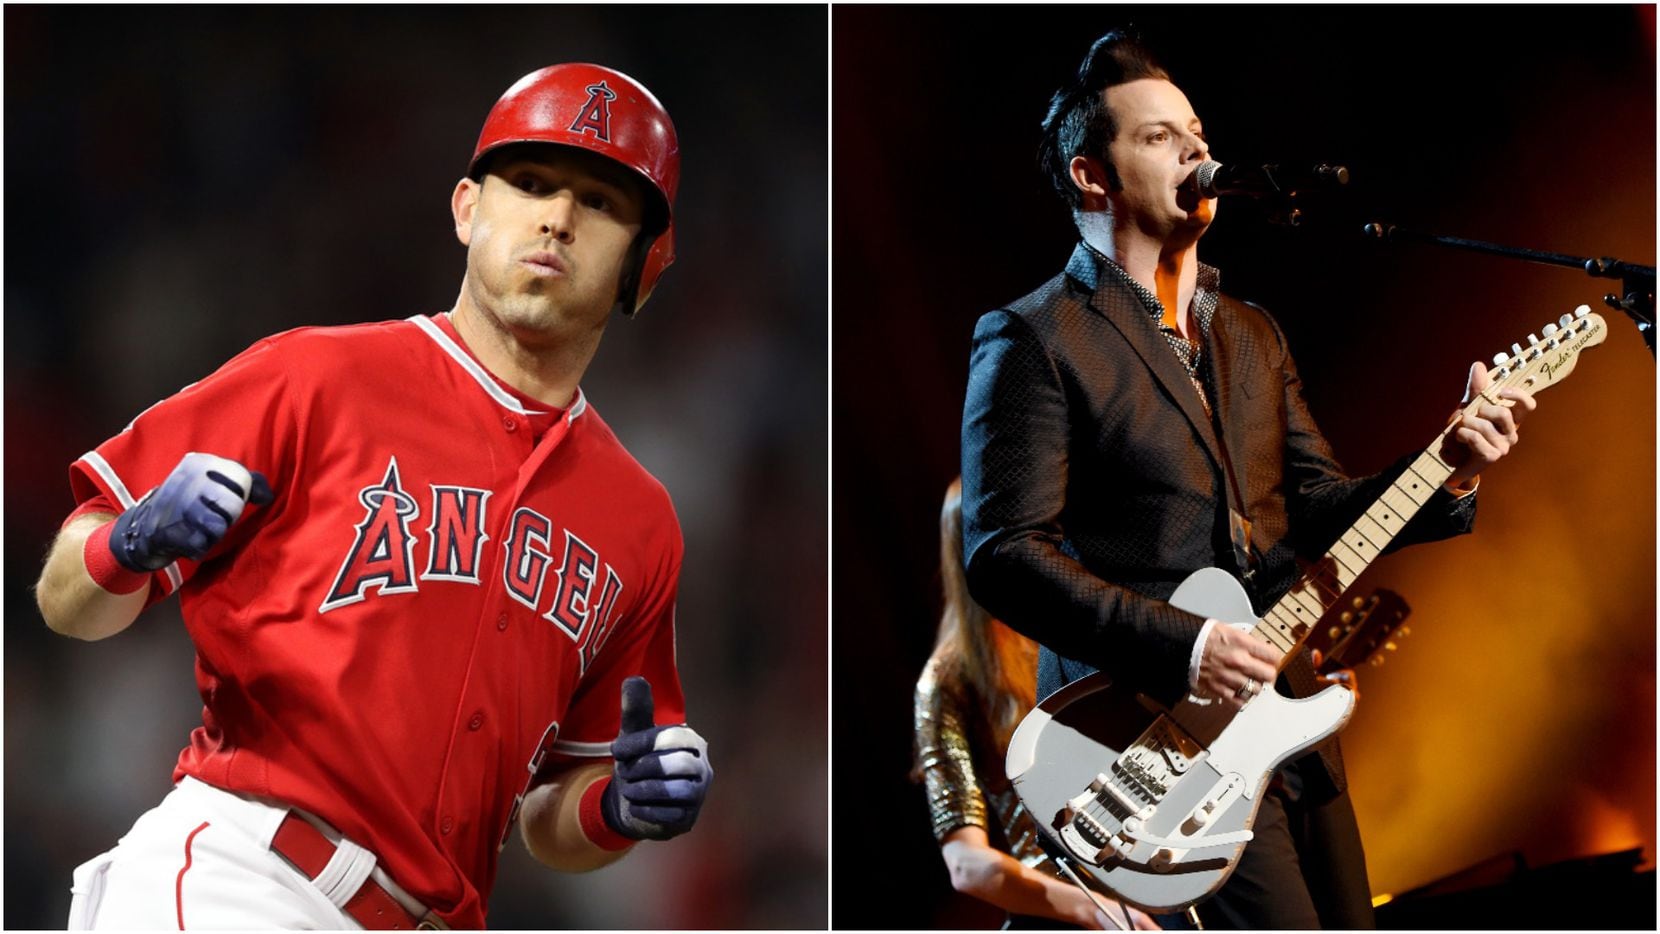 Baseball player Ian Kinsler (left) and musician Jack White (right) are partners in Warstic...